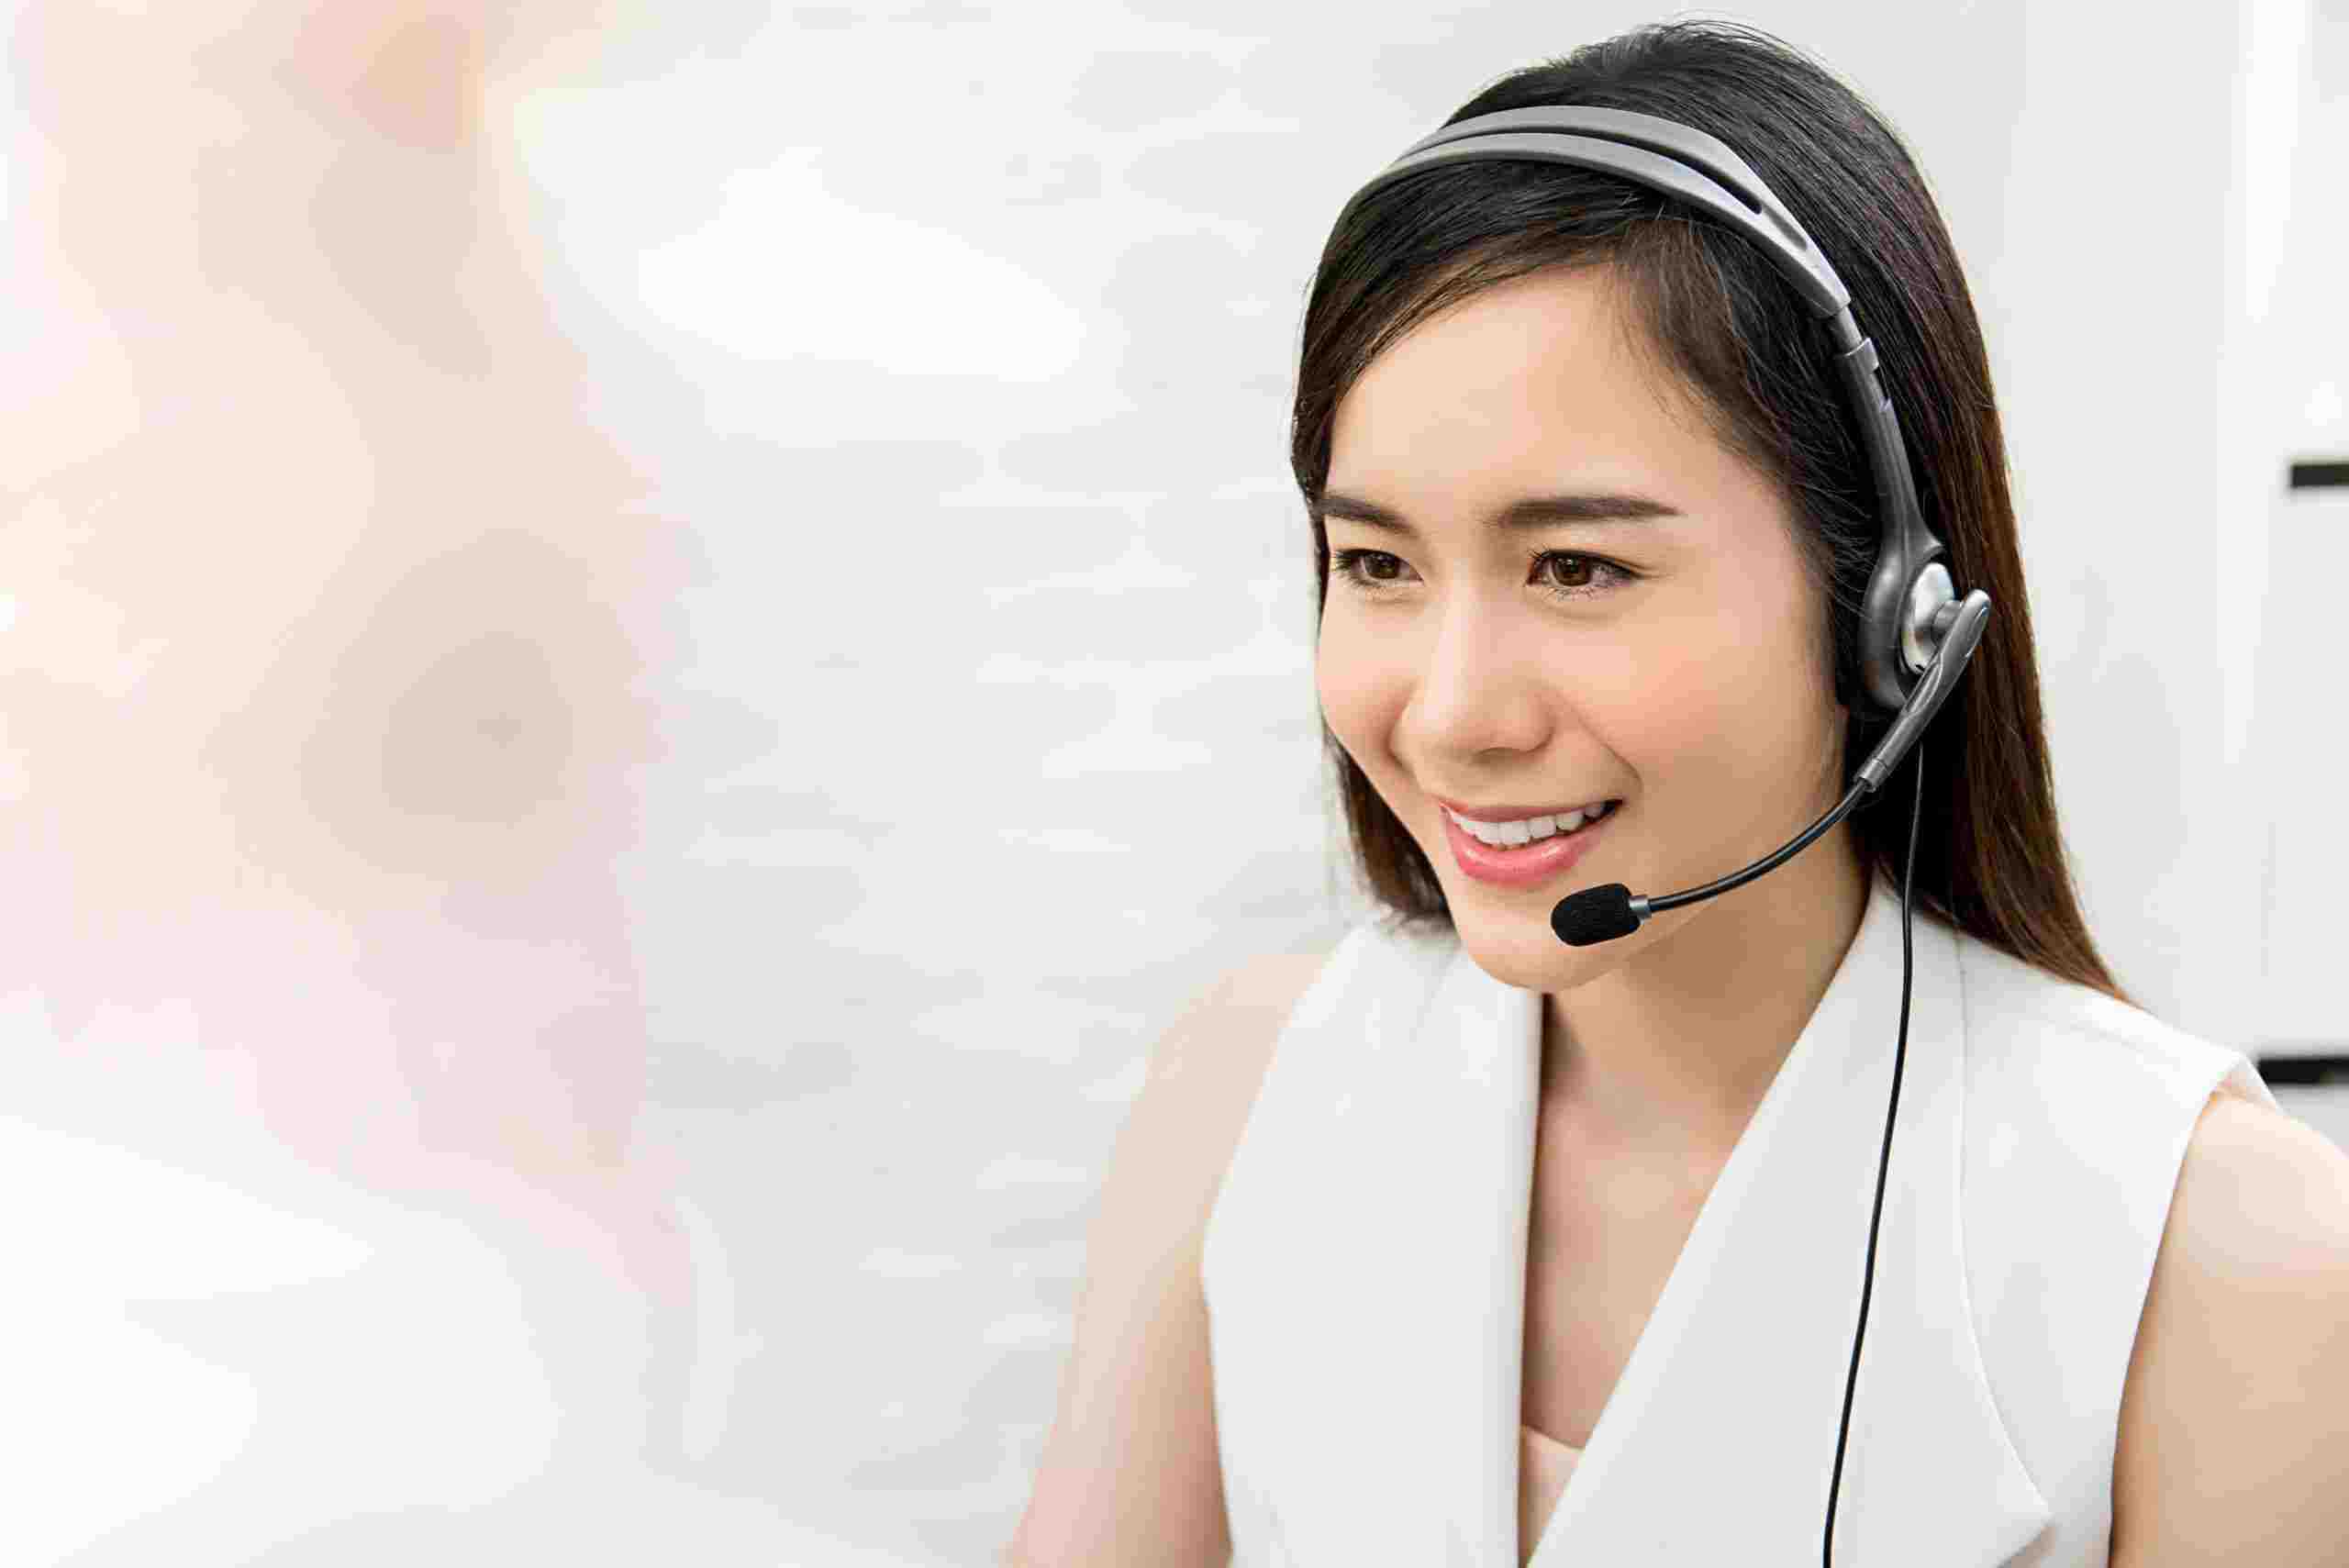 Asian woman wearing a headset and a white dress.